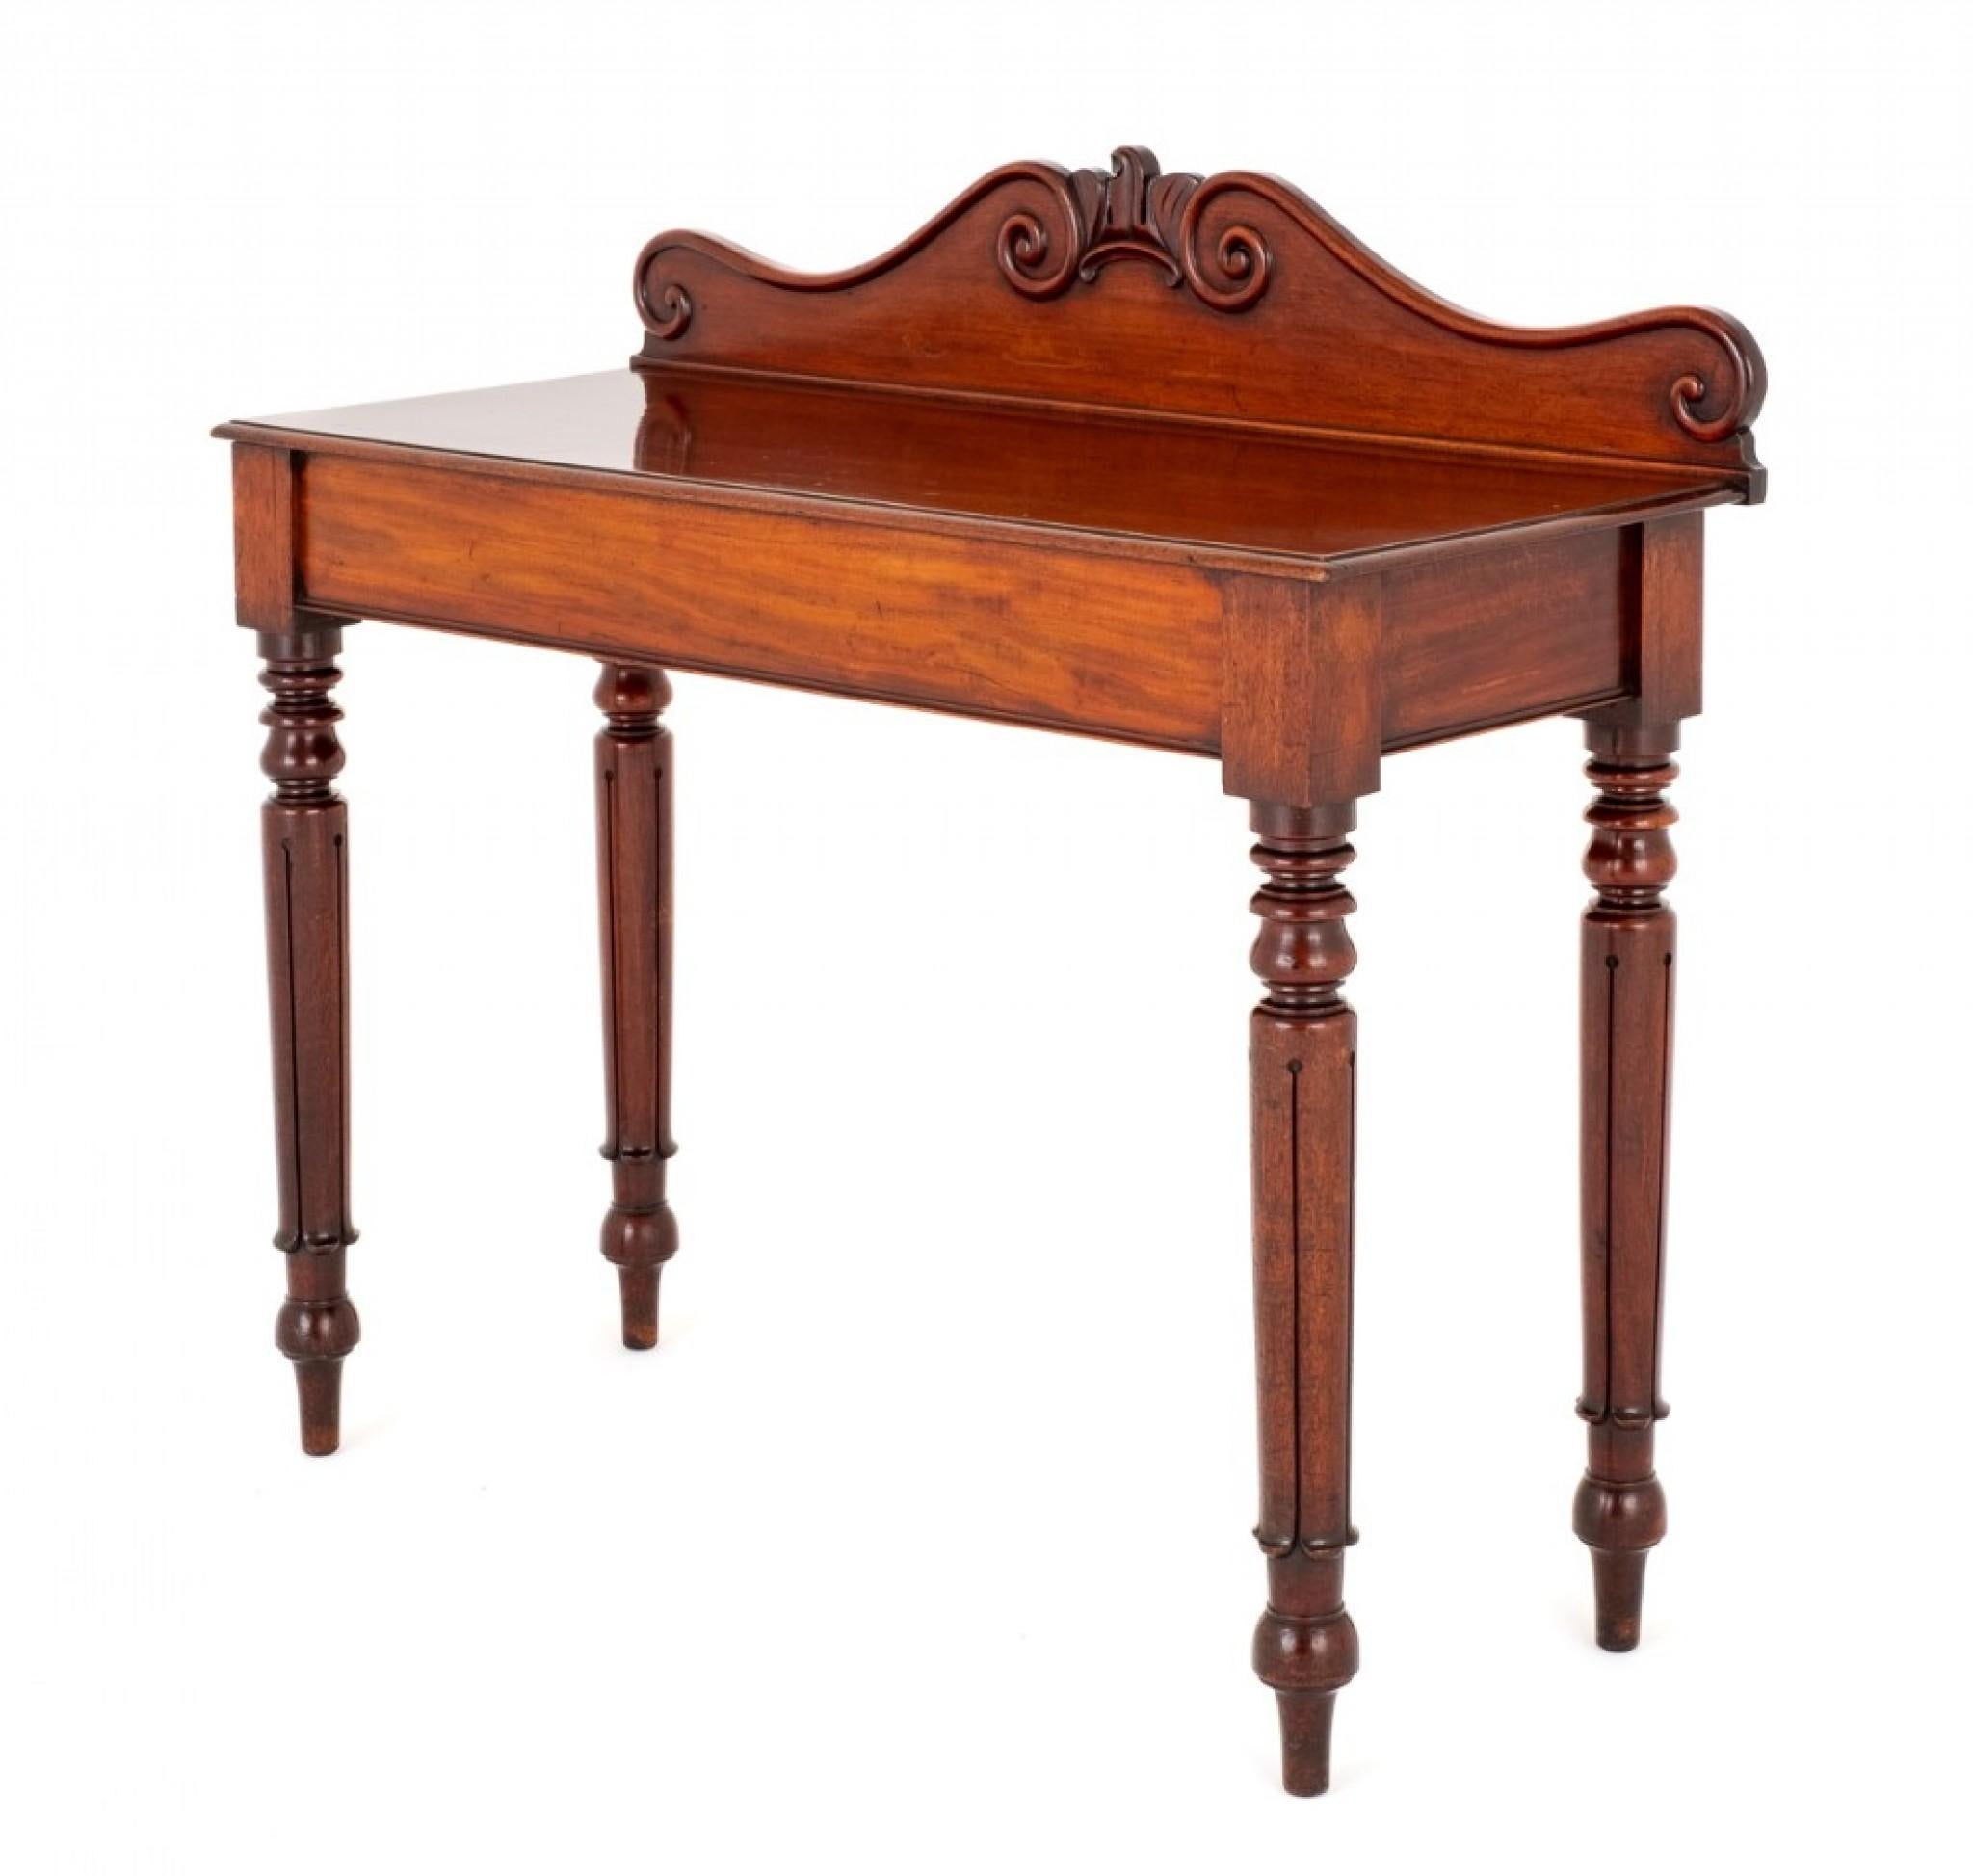 Mahogany William IV Console Table.
This Console Table Stands Upon Ring Turned Legs With Typical William IV Decoration.
19th Century
The Upstand Being of Carved and Shaped Form.
Presented in good condition